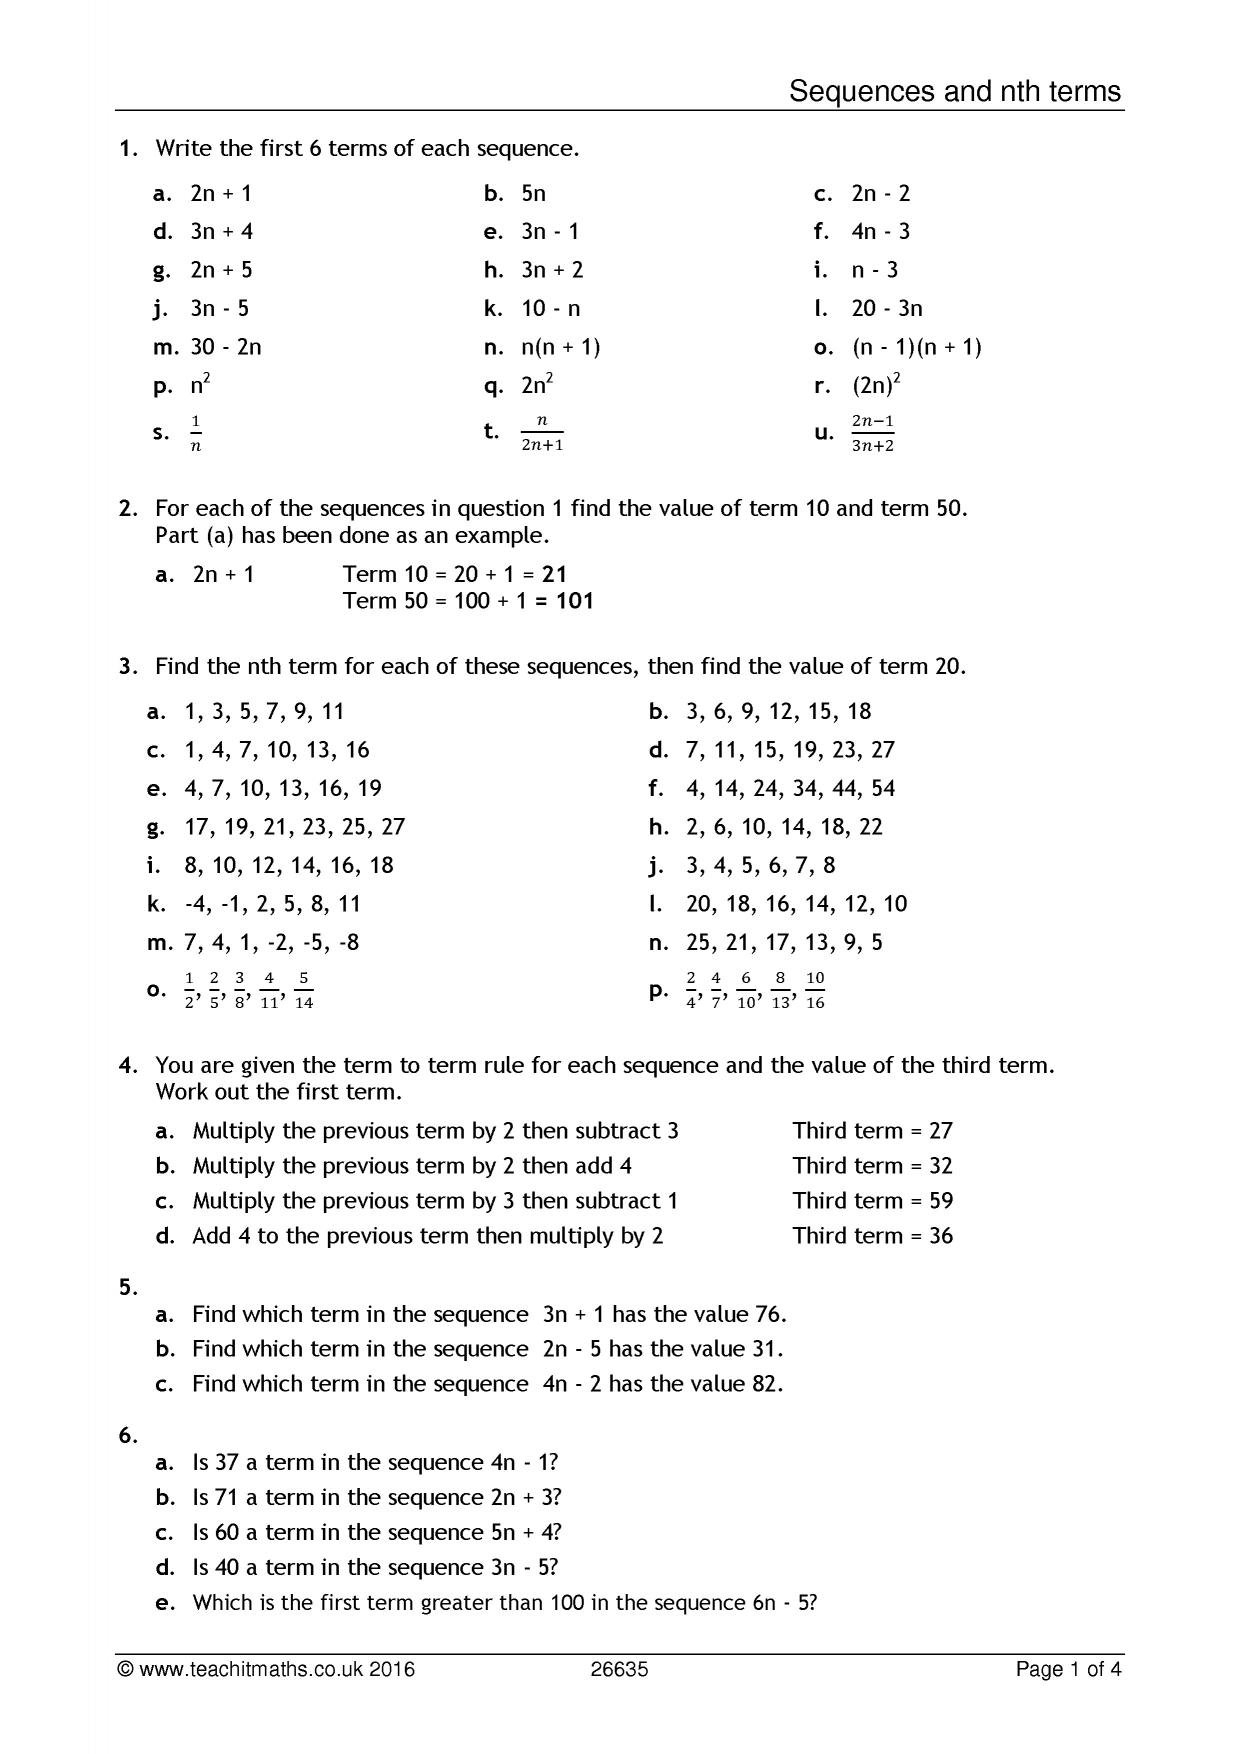 Sequences And Nth Terms Worksheet Pdf  Teachit Maths Pertaining To Sequences Worksheet Answers